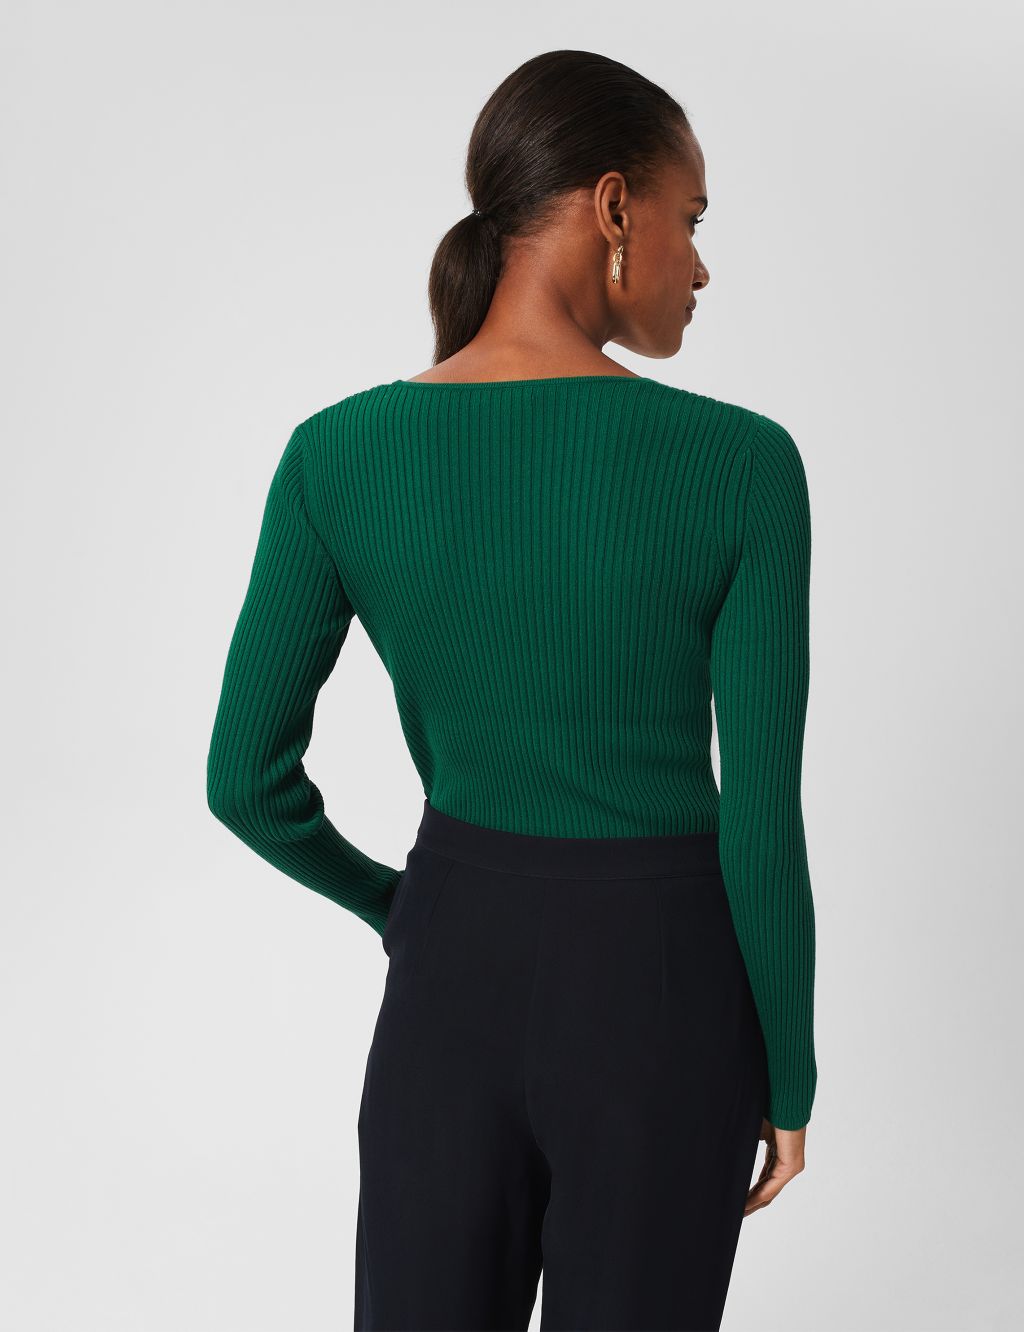 Ribbed Square Neck Knitted Top image 2